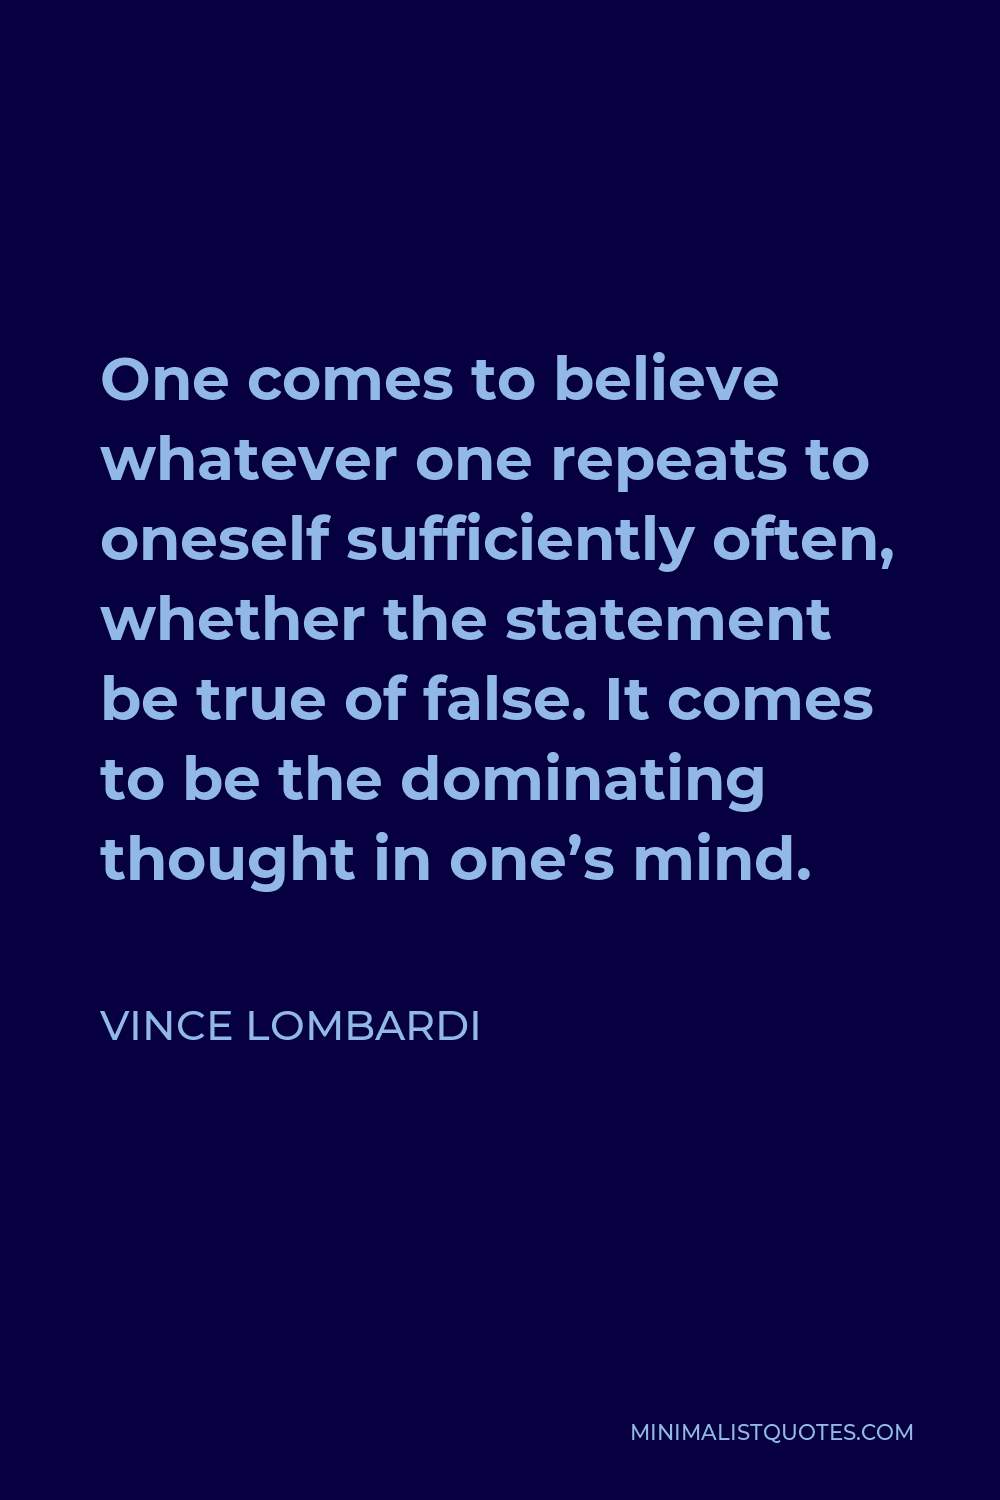 Vince Lombardi Quote - One comes to believe whatever one repeats to oneself sufficiently often, whether the statement be true of false. It comes to be the dominating thought in one’s mind.